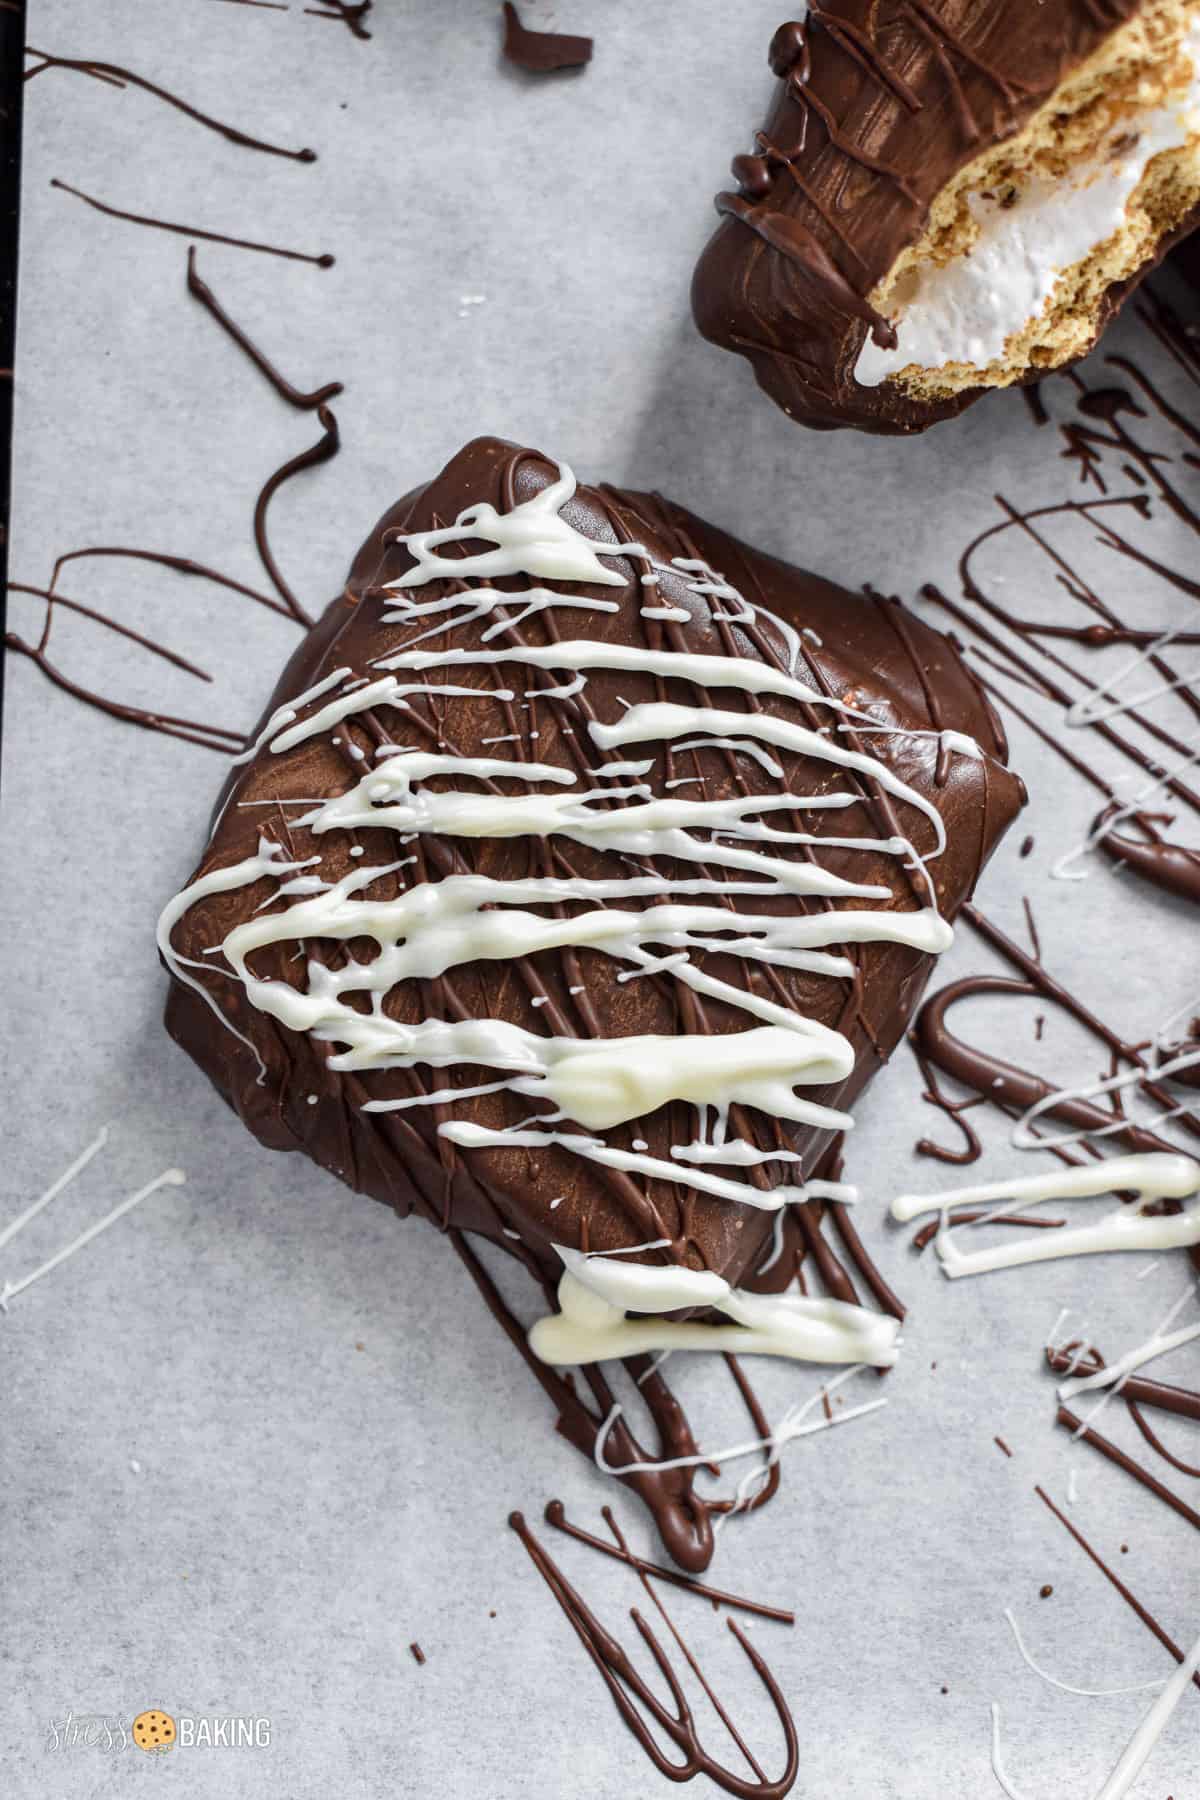 Square chocolate cookie drizzled with chocolate and white chocolate sitting on parchment paper